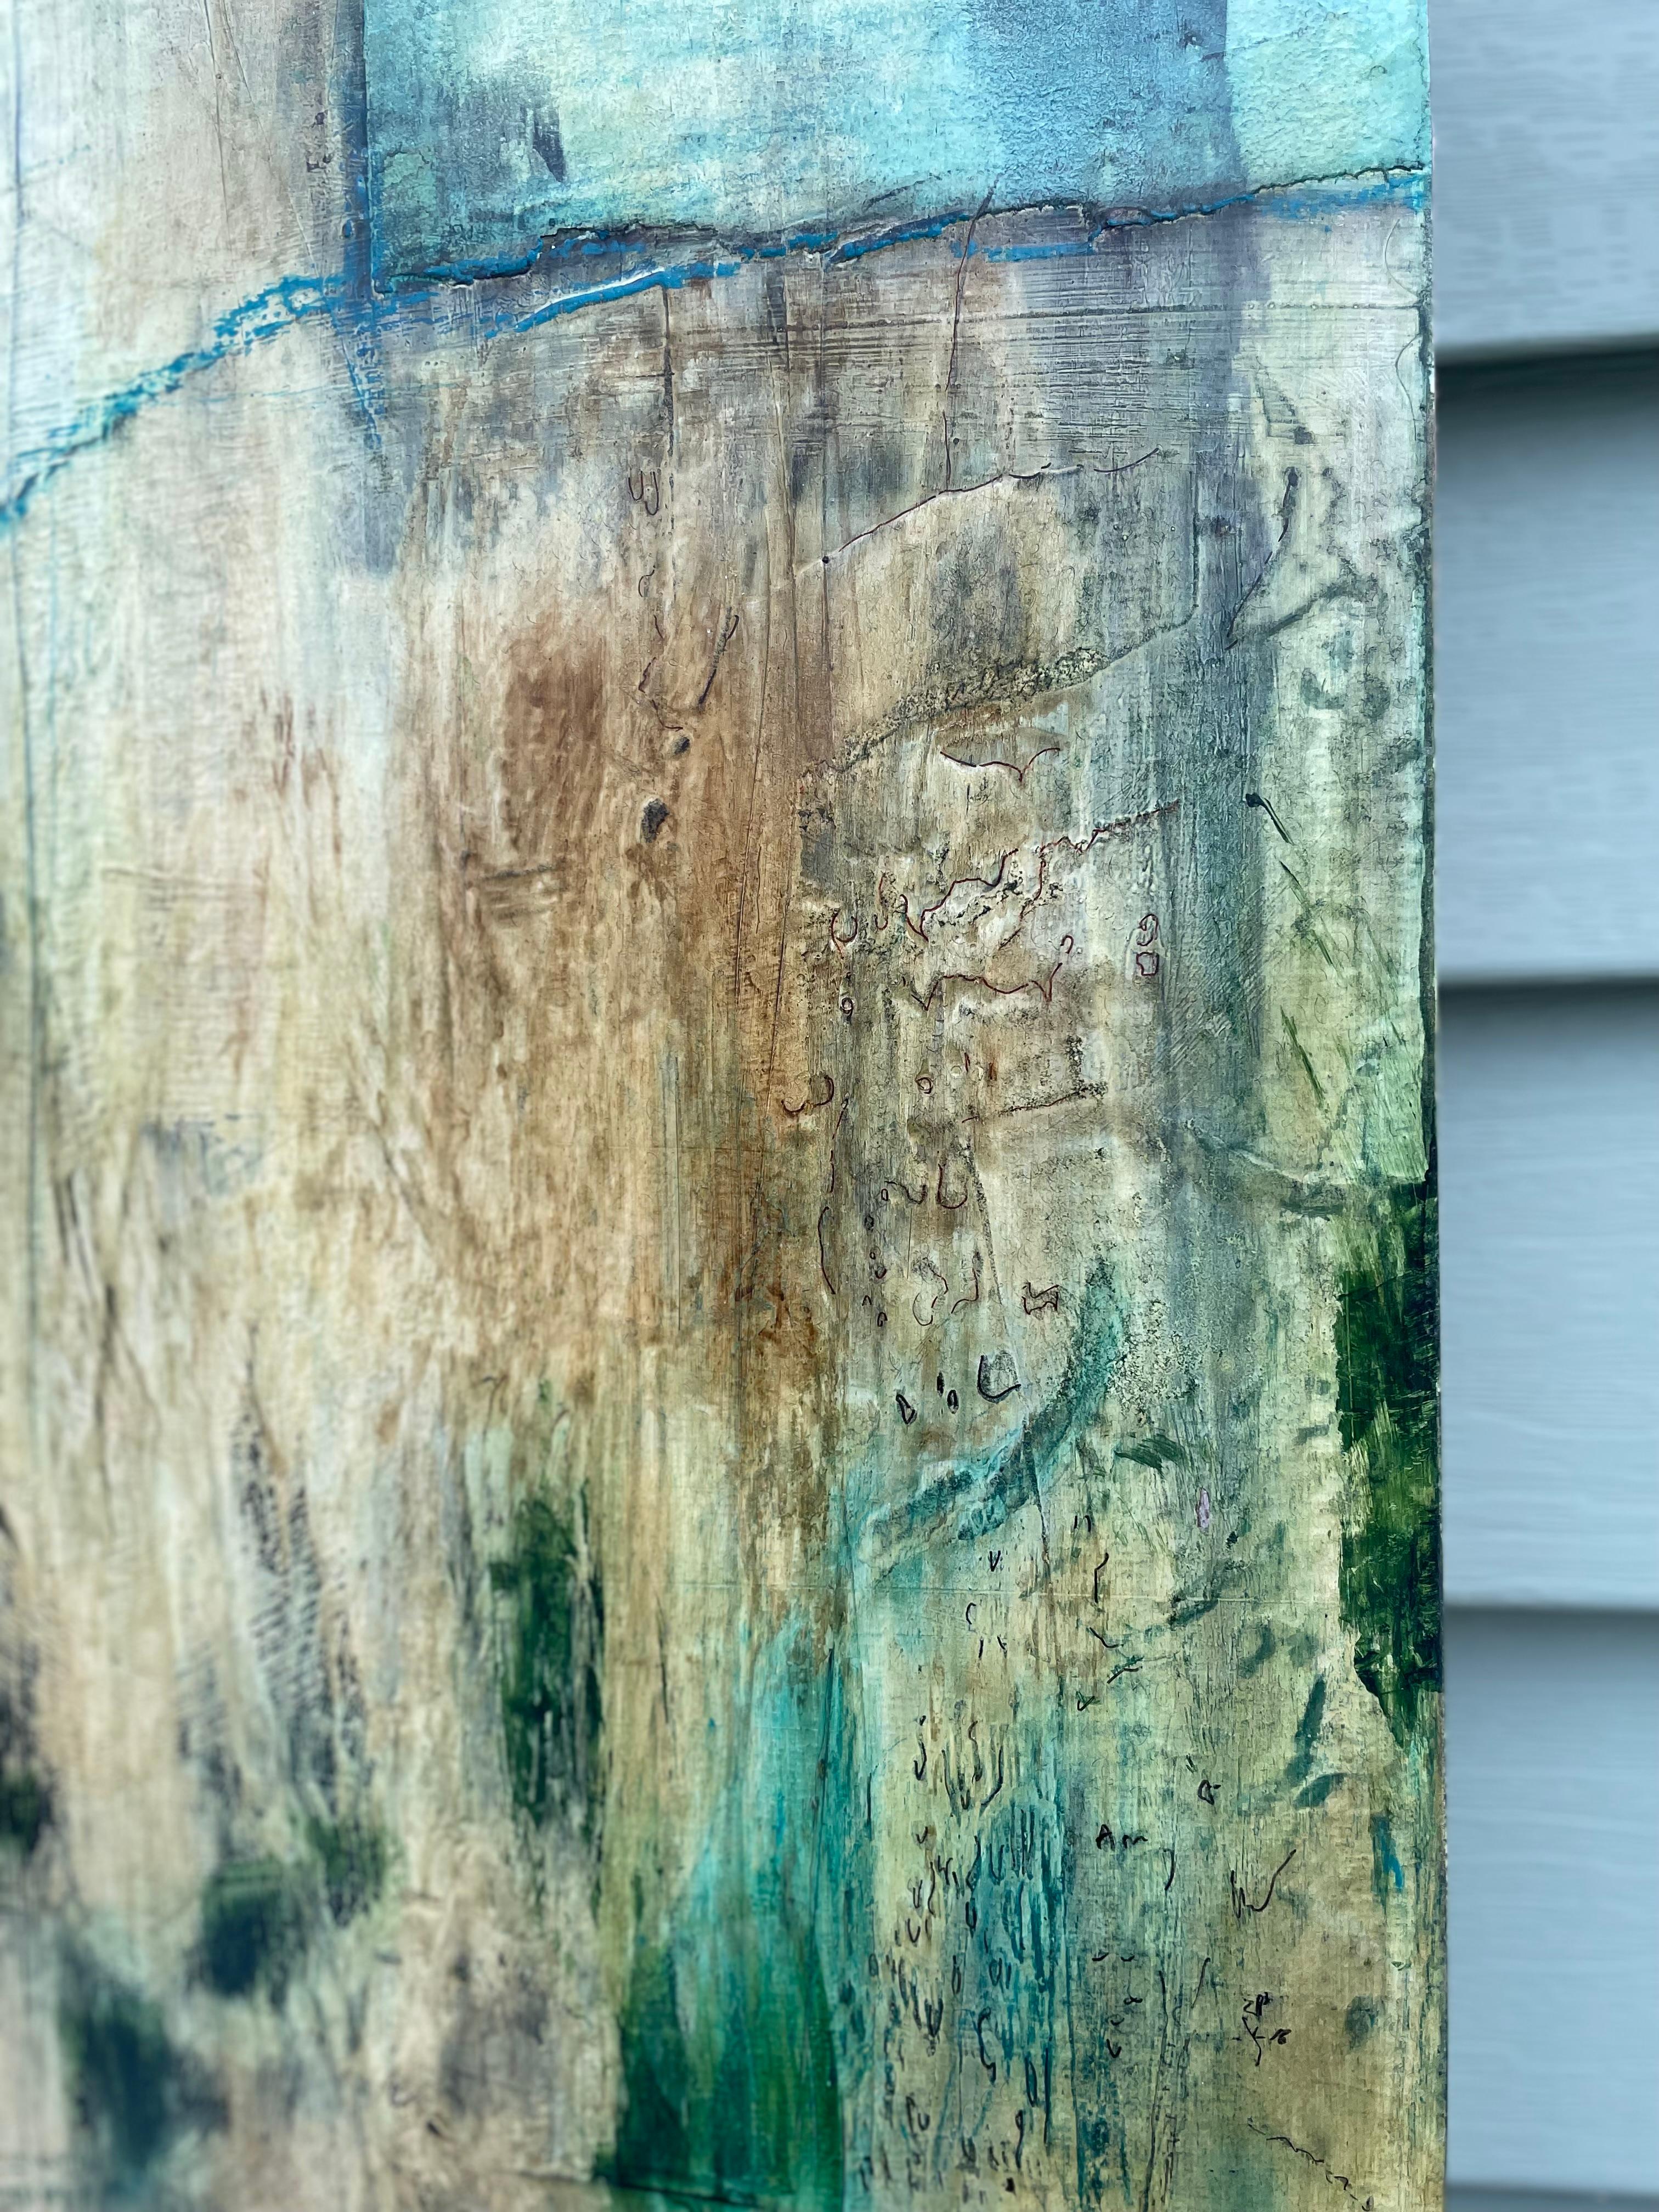 <p>Artist Comments<br>In this mixed media abstract by artist Margriet Hogue, Cool blues, green, and turquoise intermingle with textured beige hues. Margriet starts her process with layers of paint and paper that have been distressed through sanding